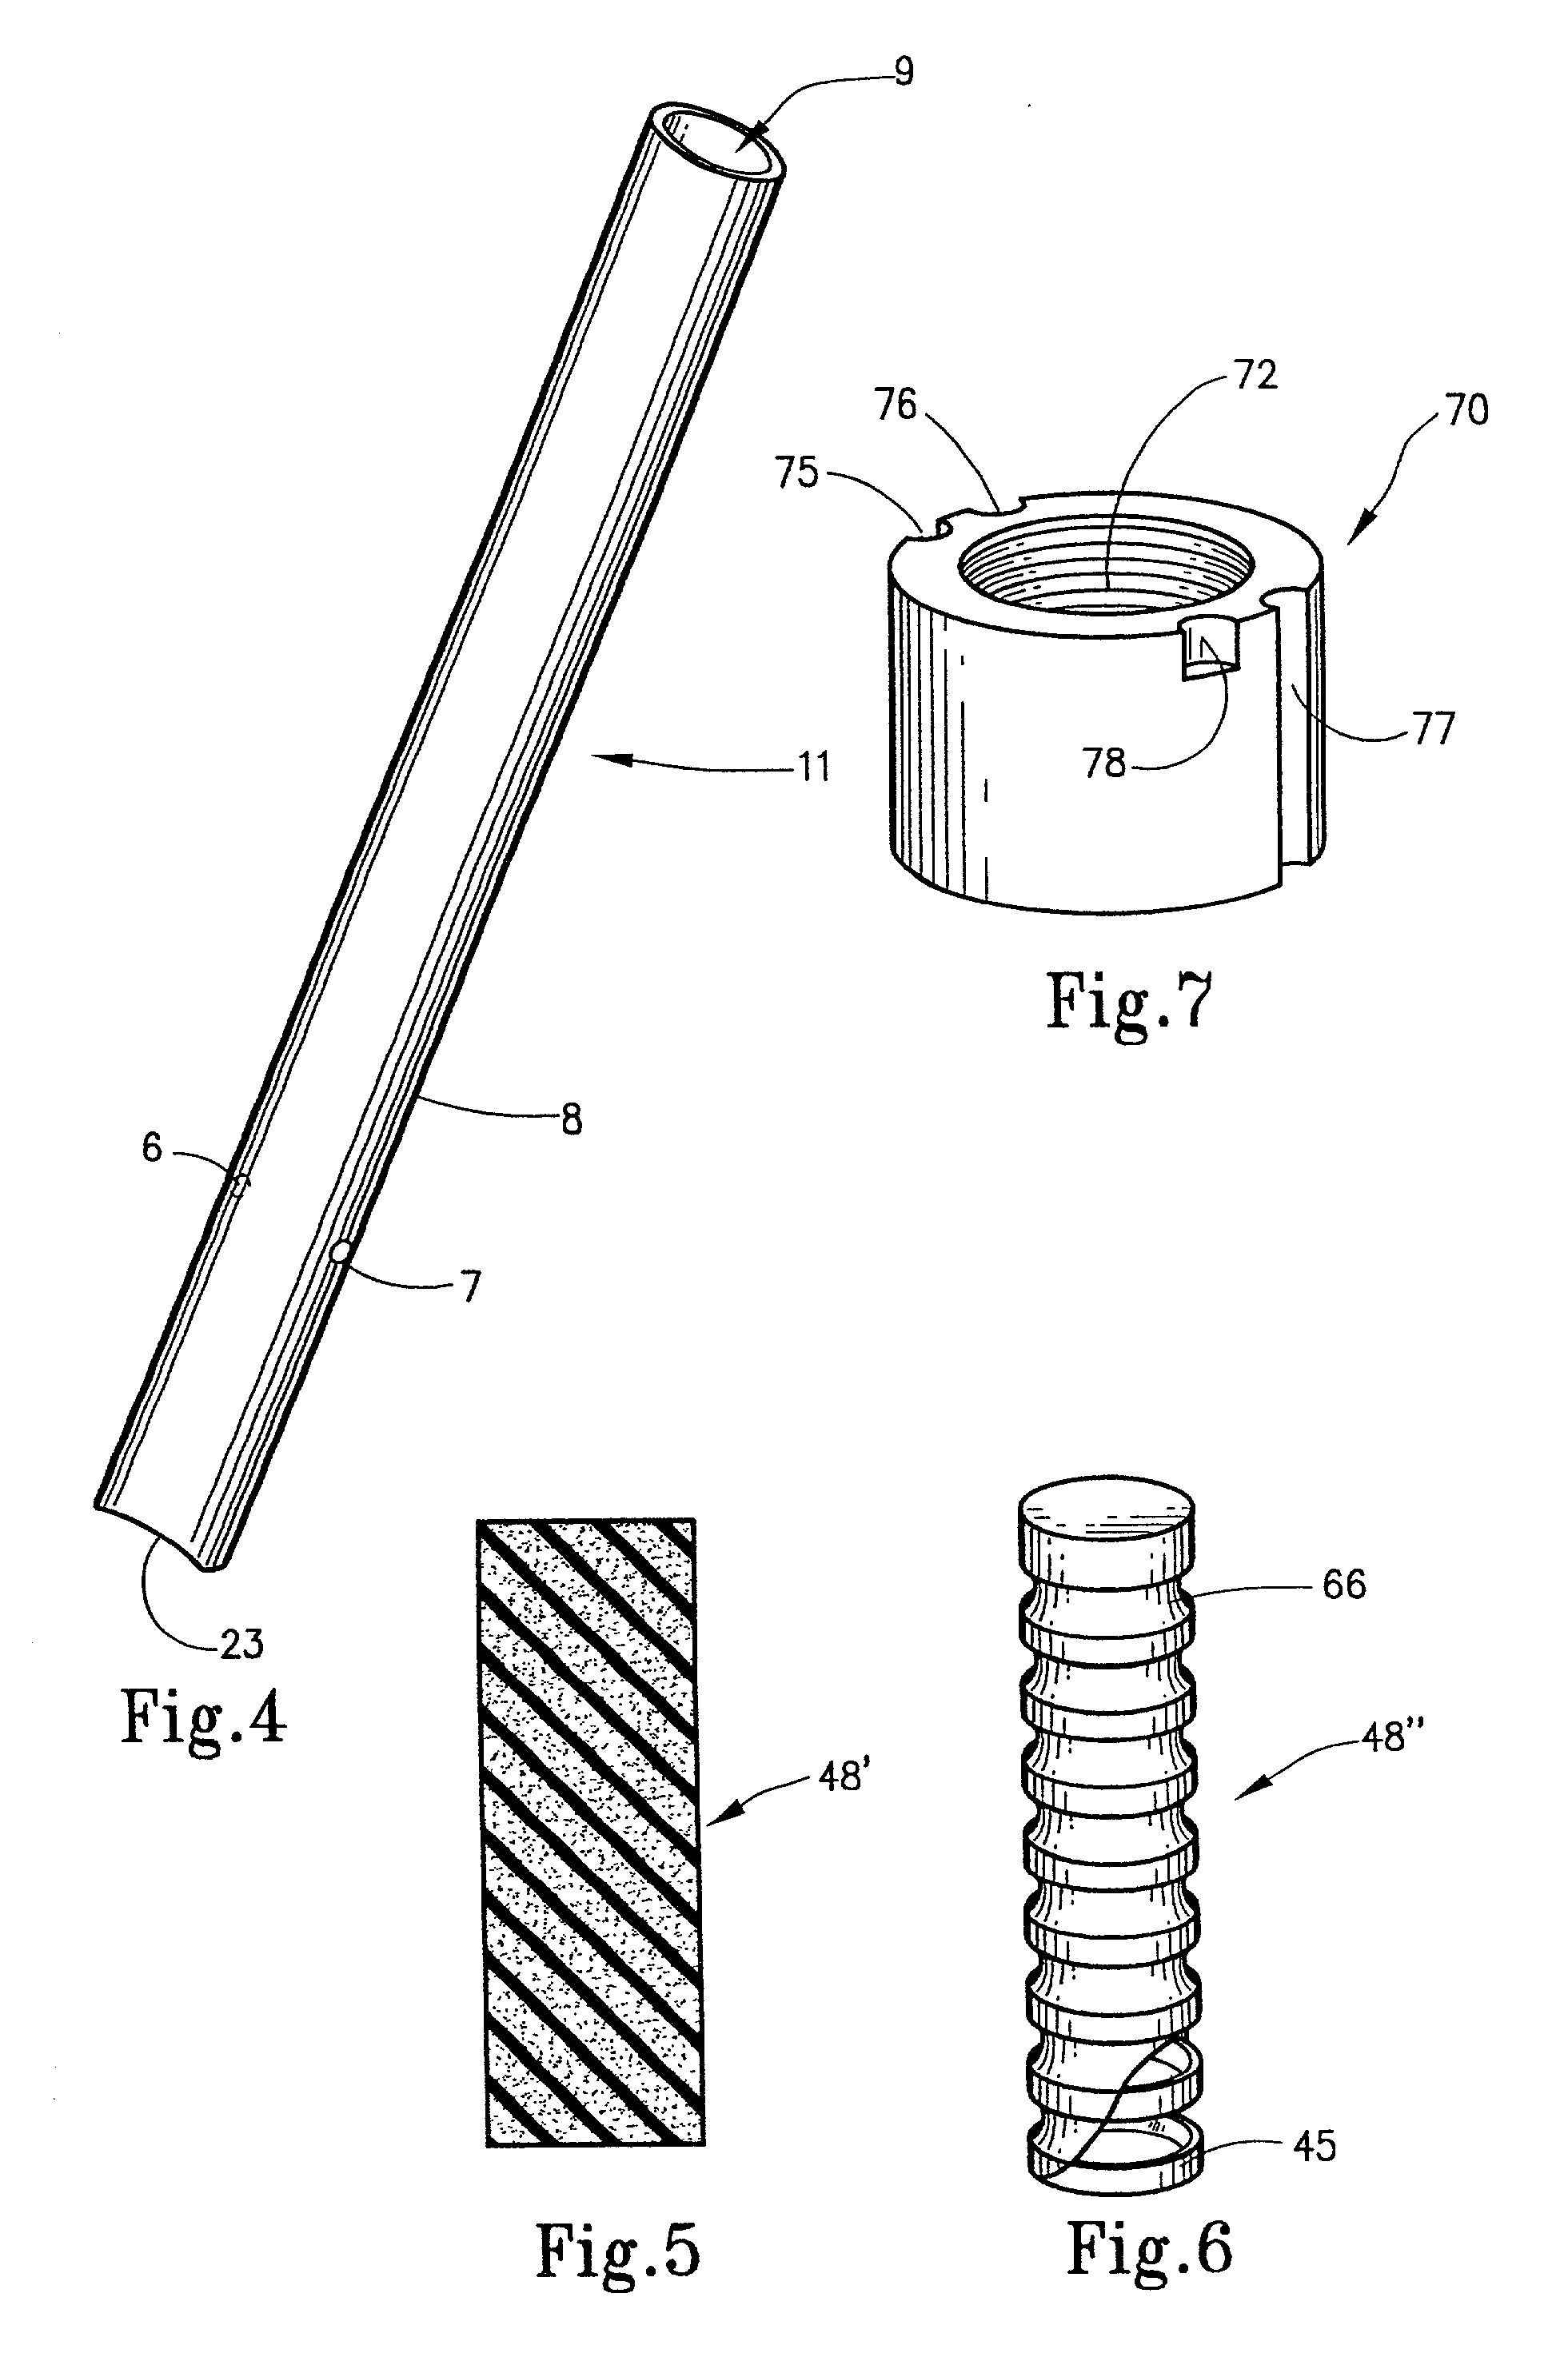 Shock absorber for cycle and methodology incorporating the same